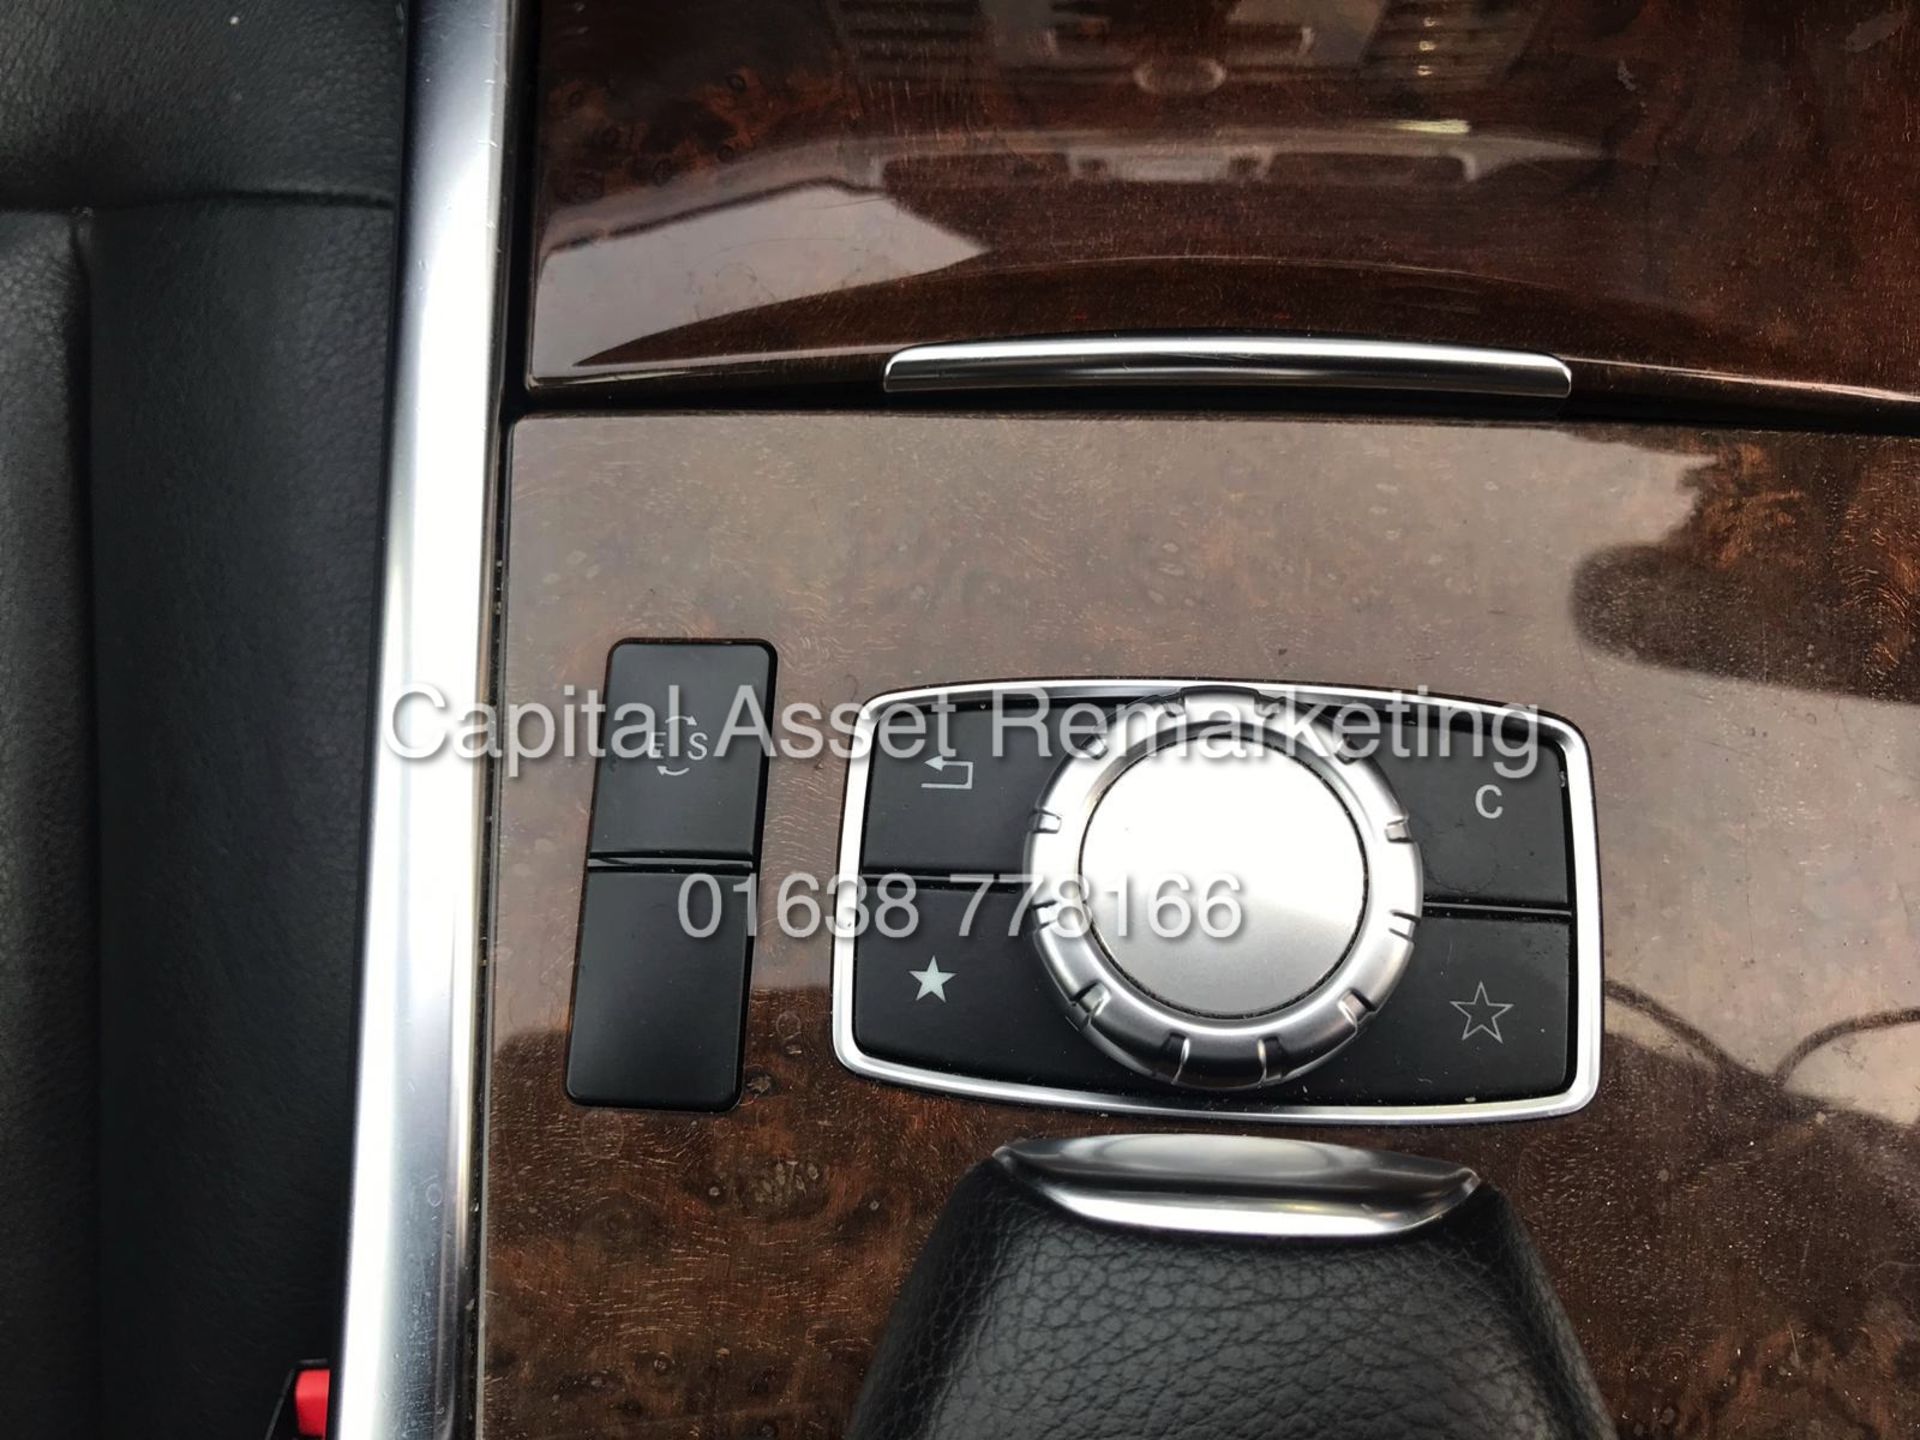 MERCEDES E220d "SPECIAL EQUIPMENT" 7G TRONIC (13 REG - NEW SHAPE) COMAND SAT NAV - LEATHER *LOOK* - Image 11 of 13